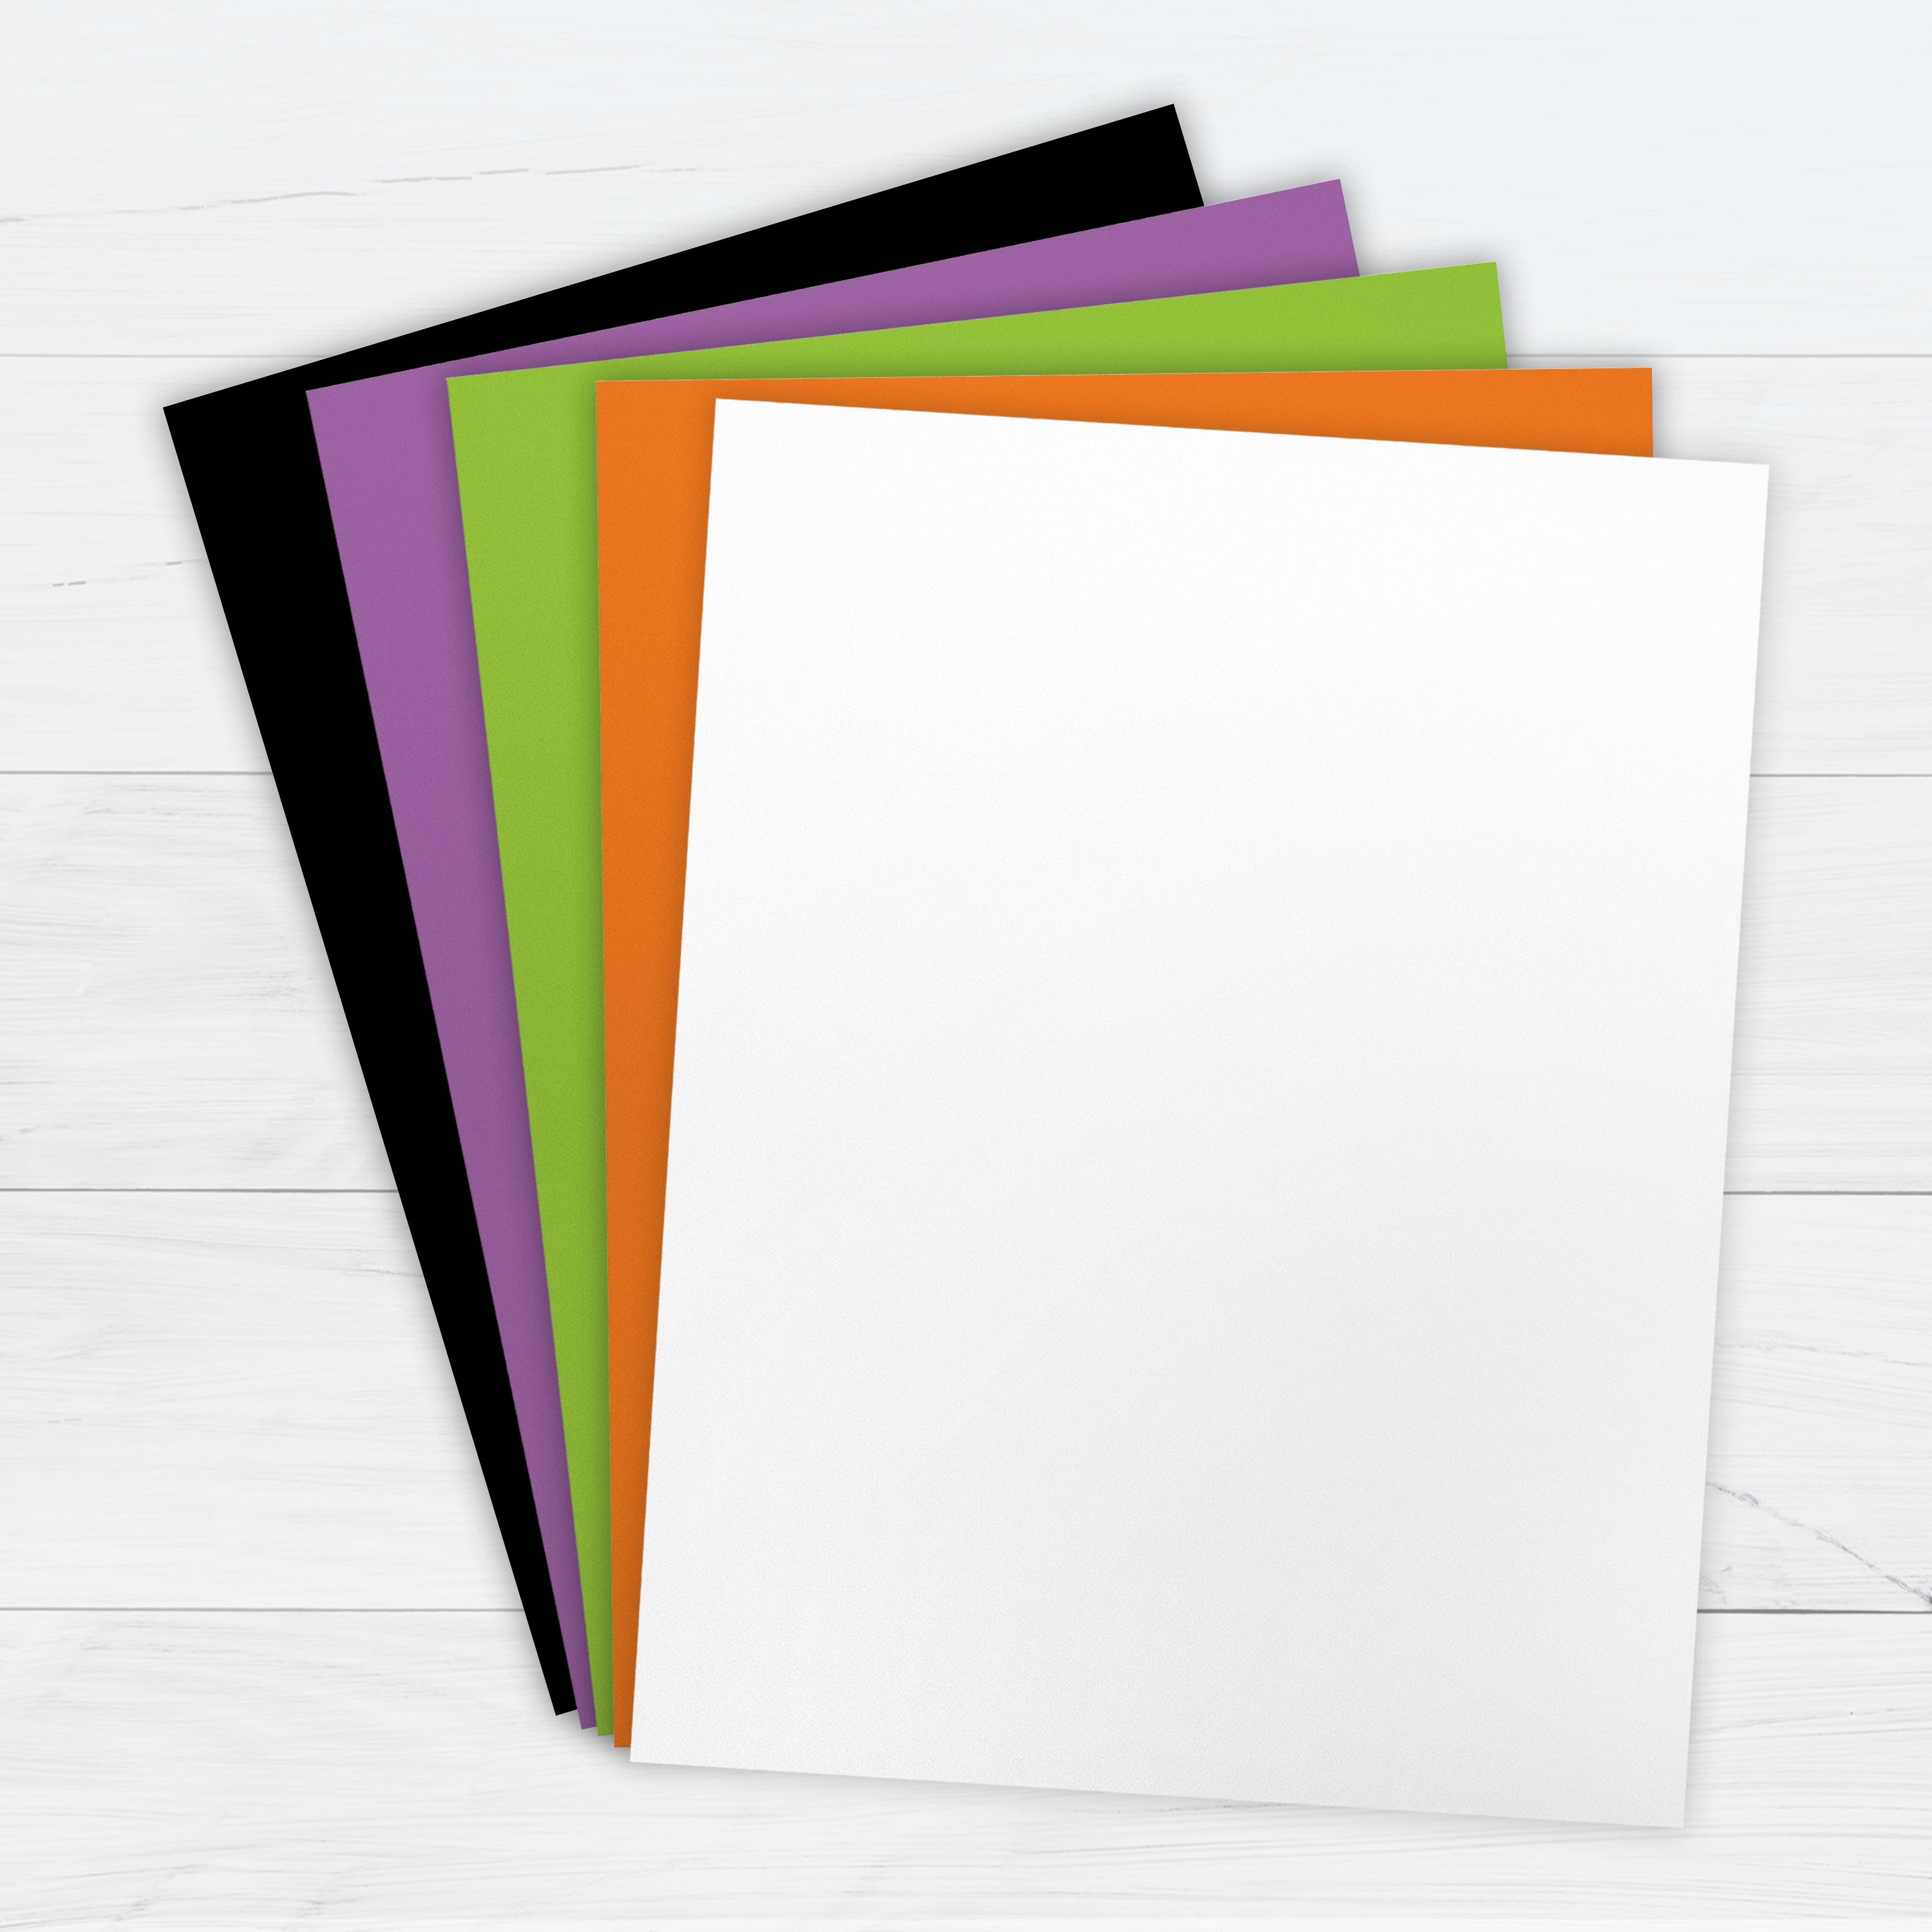 PrintWorks Neon Cardstock, 5 Assorted Colors, Solid Core, 200